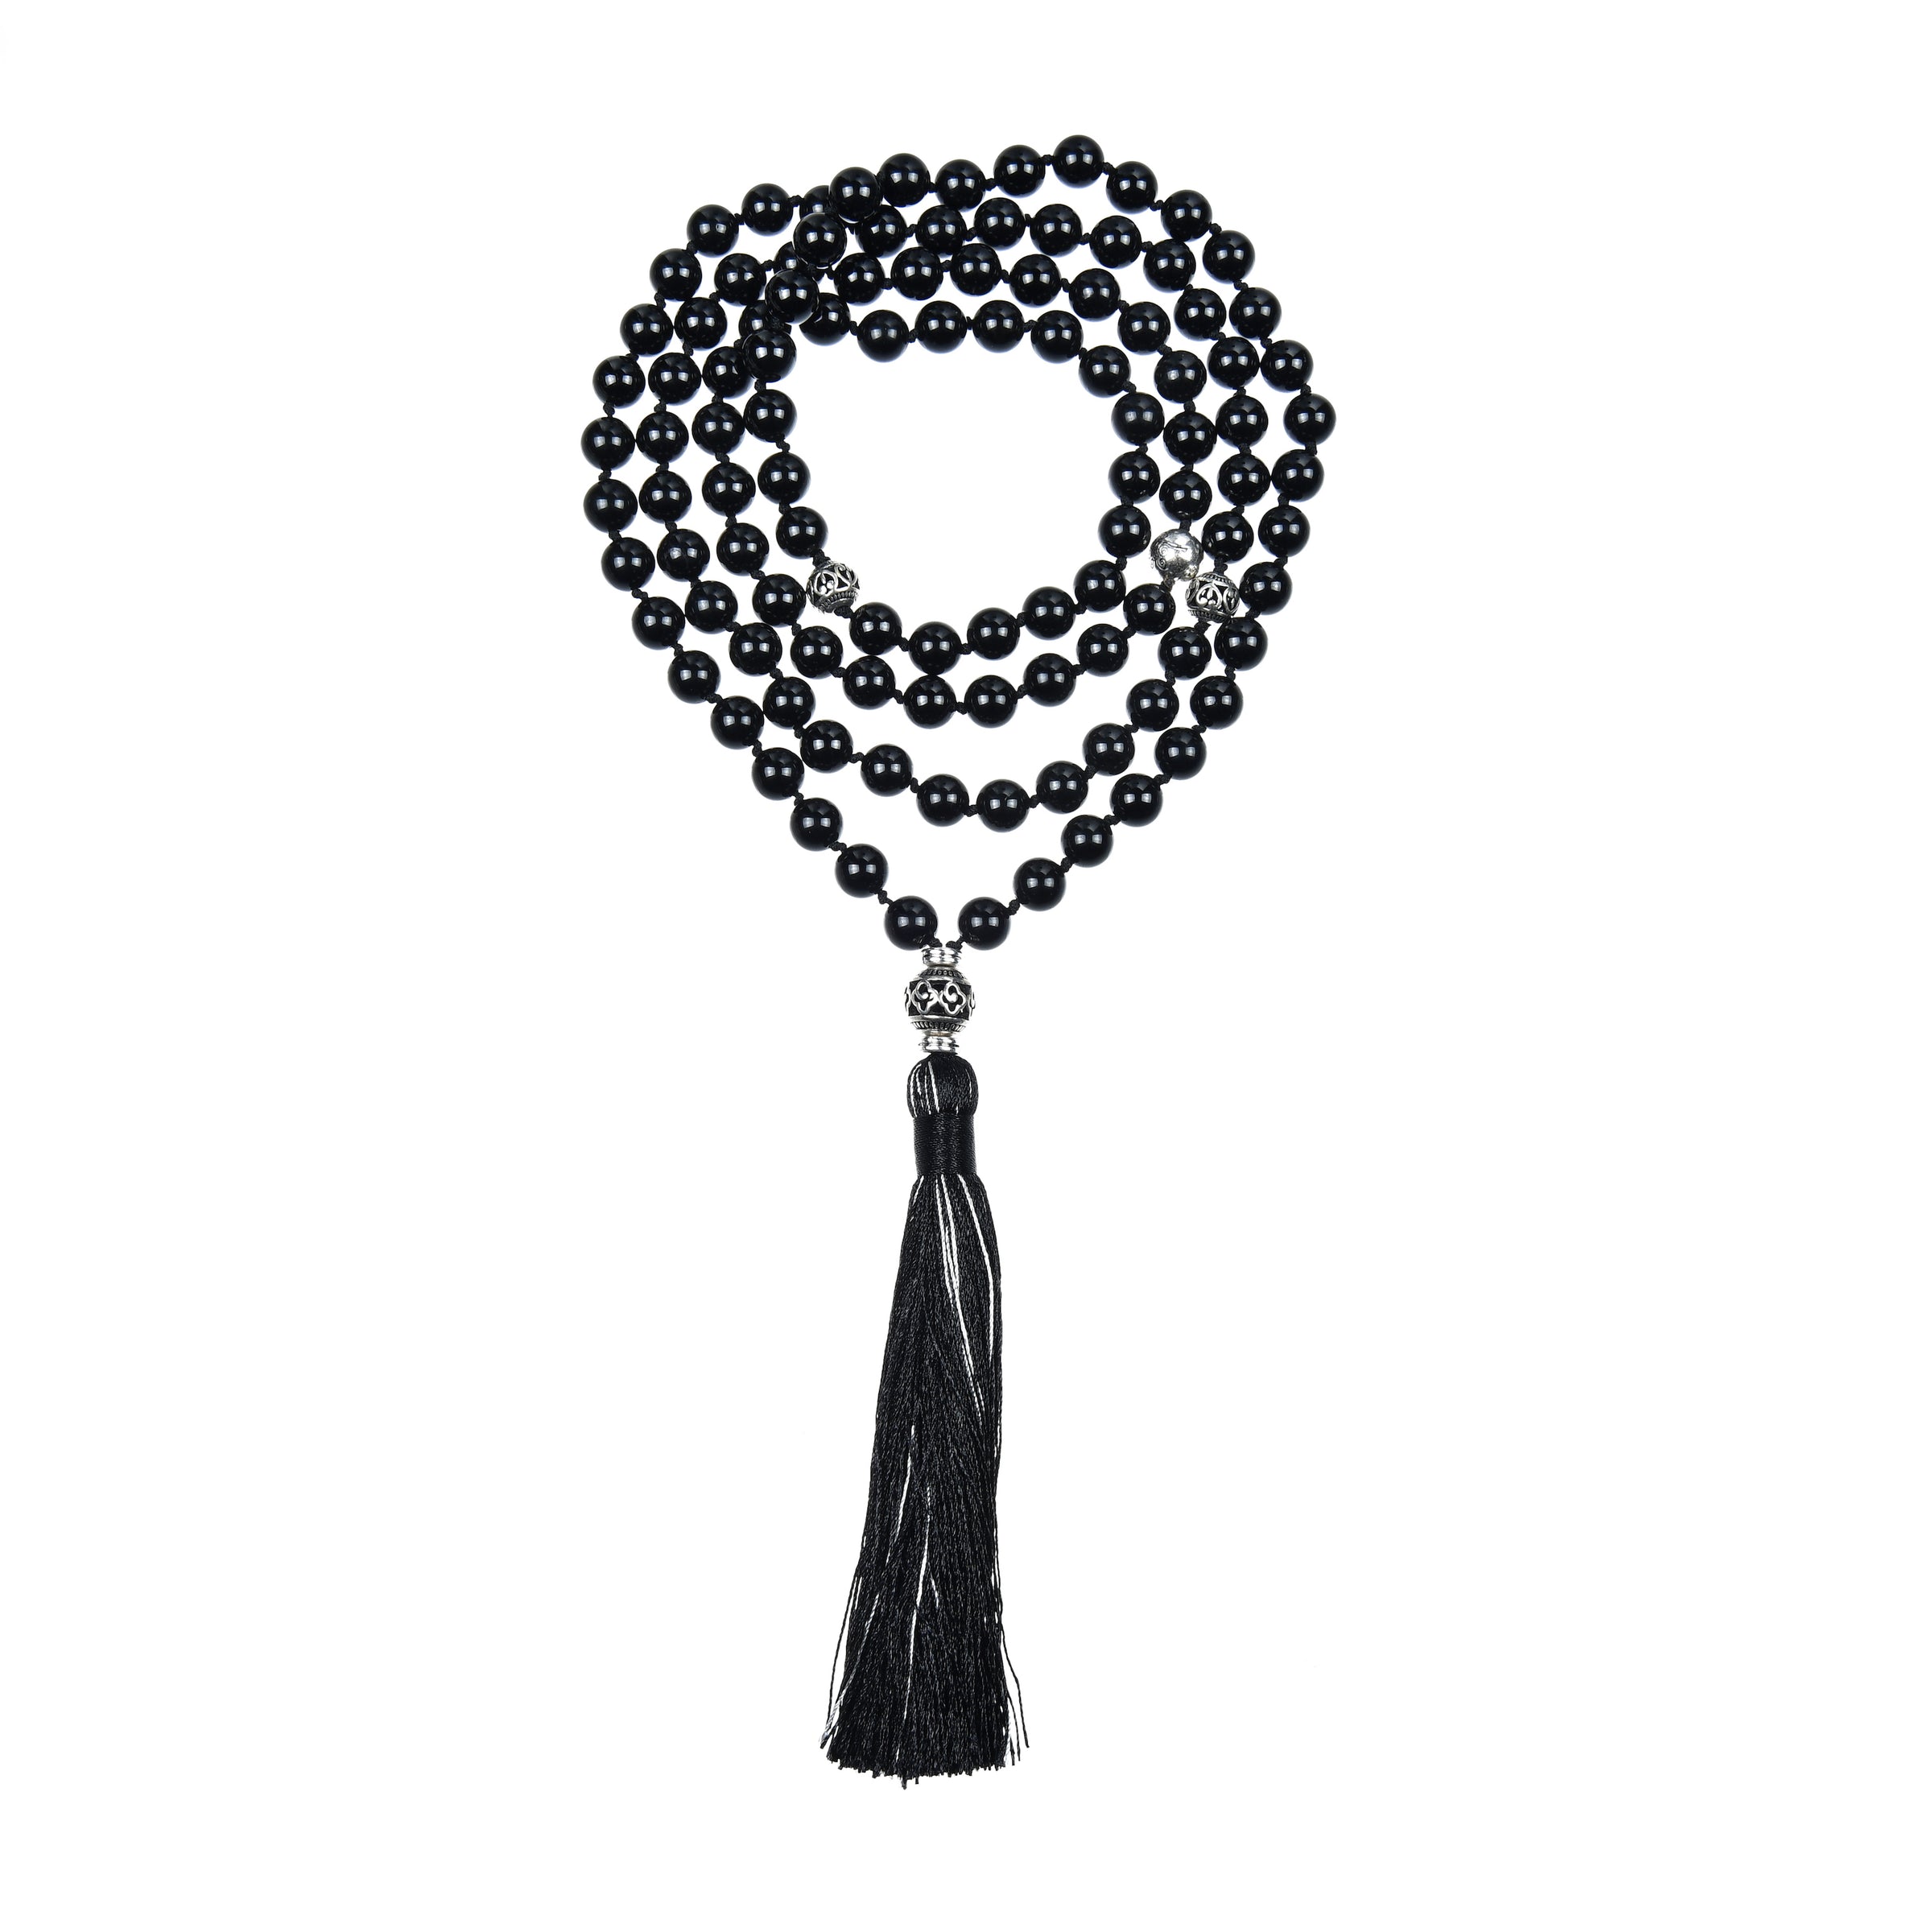 Mala Necklace | 108 Hand-Knotted 8mm Round Beads (Black Agate)